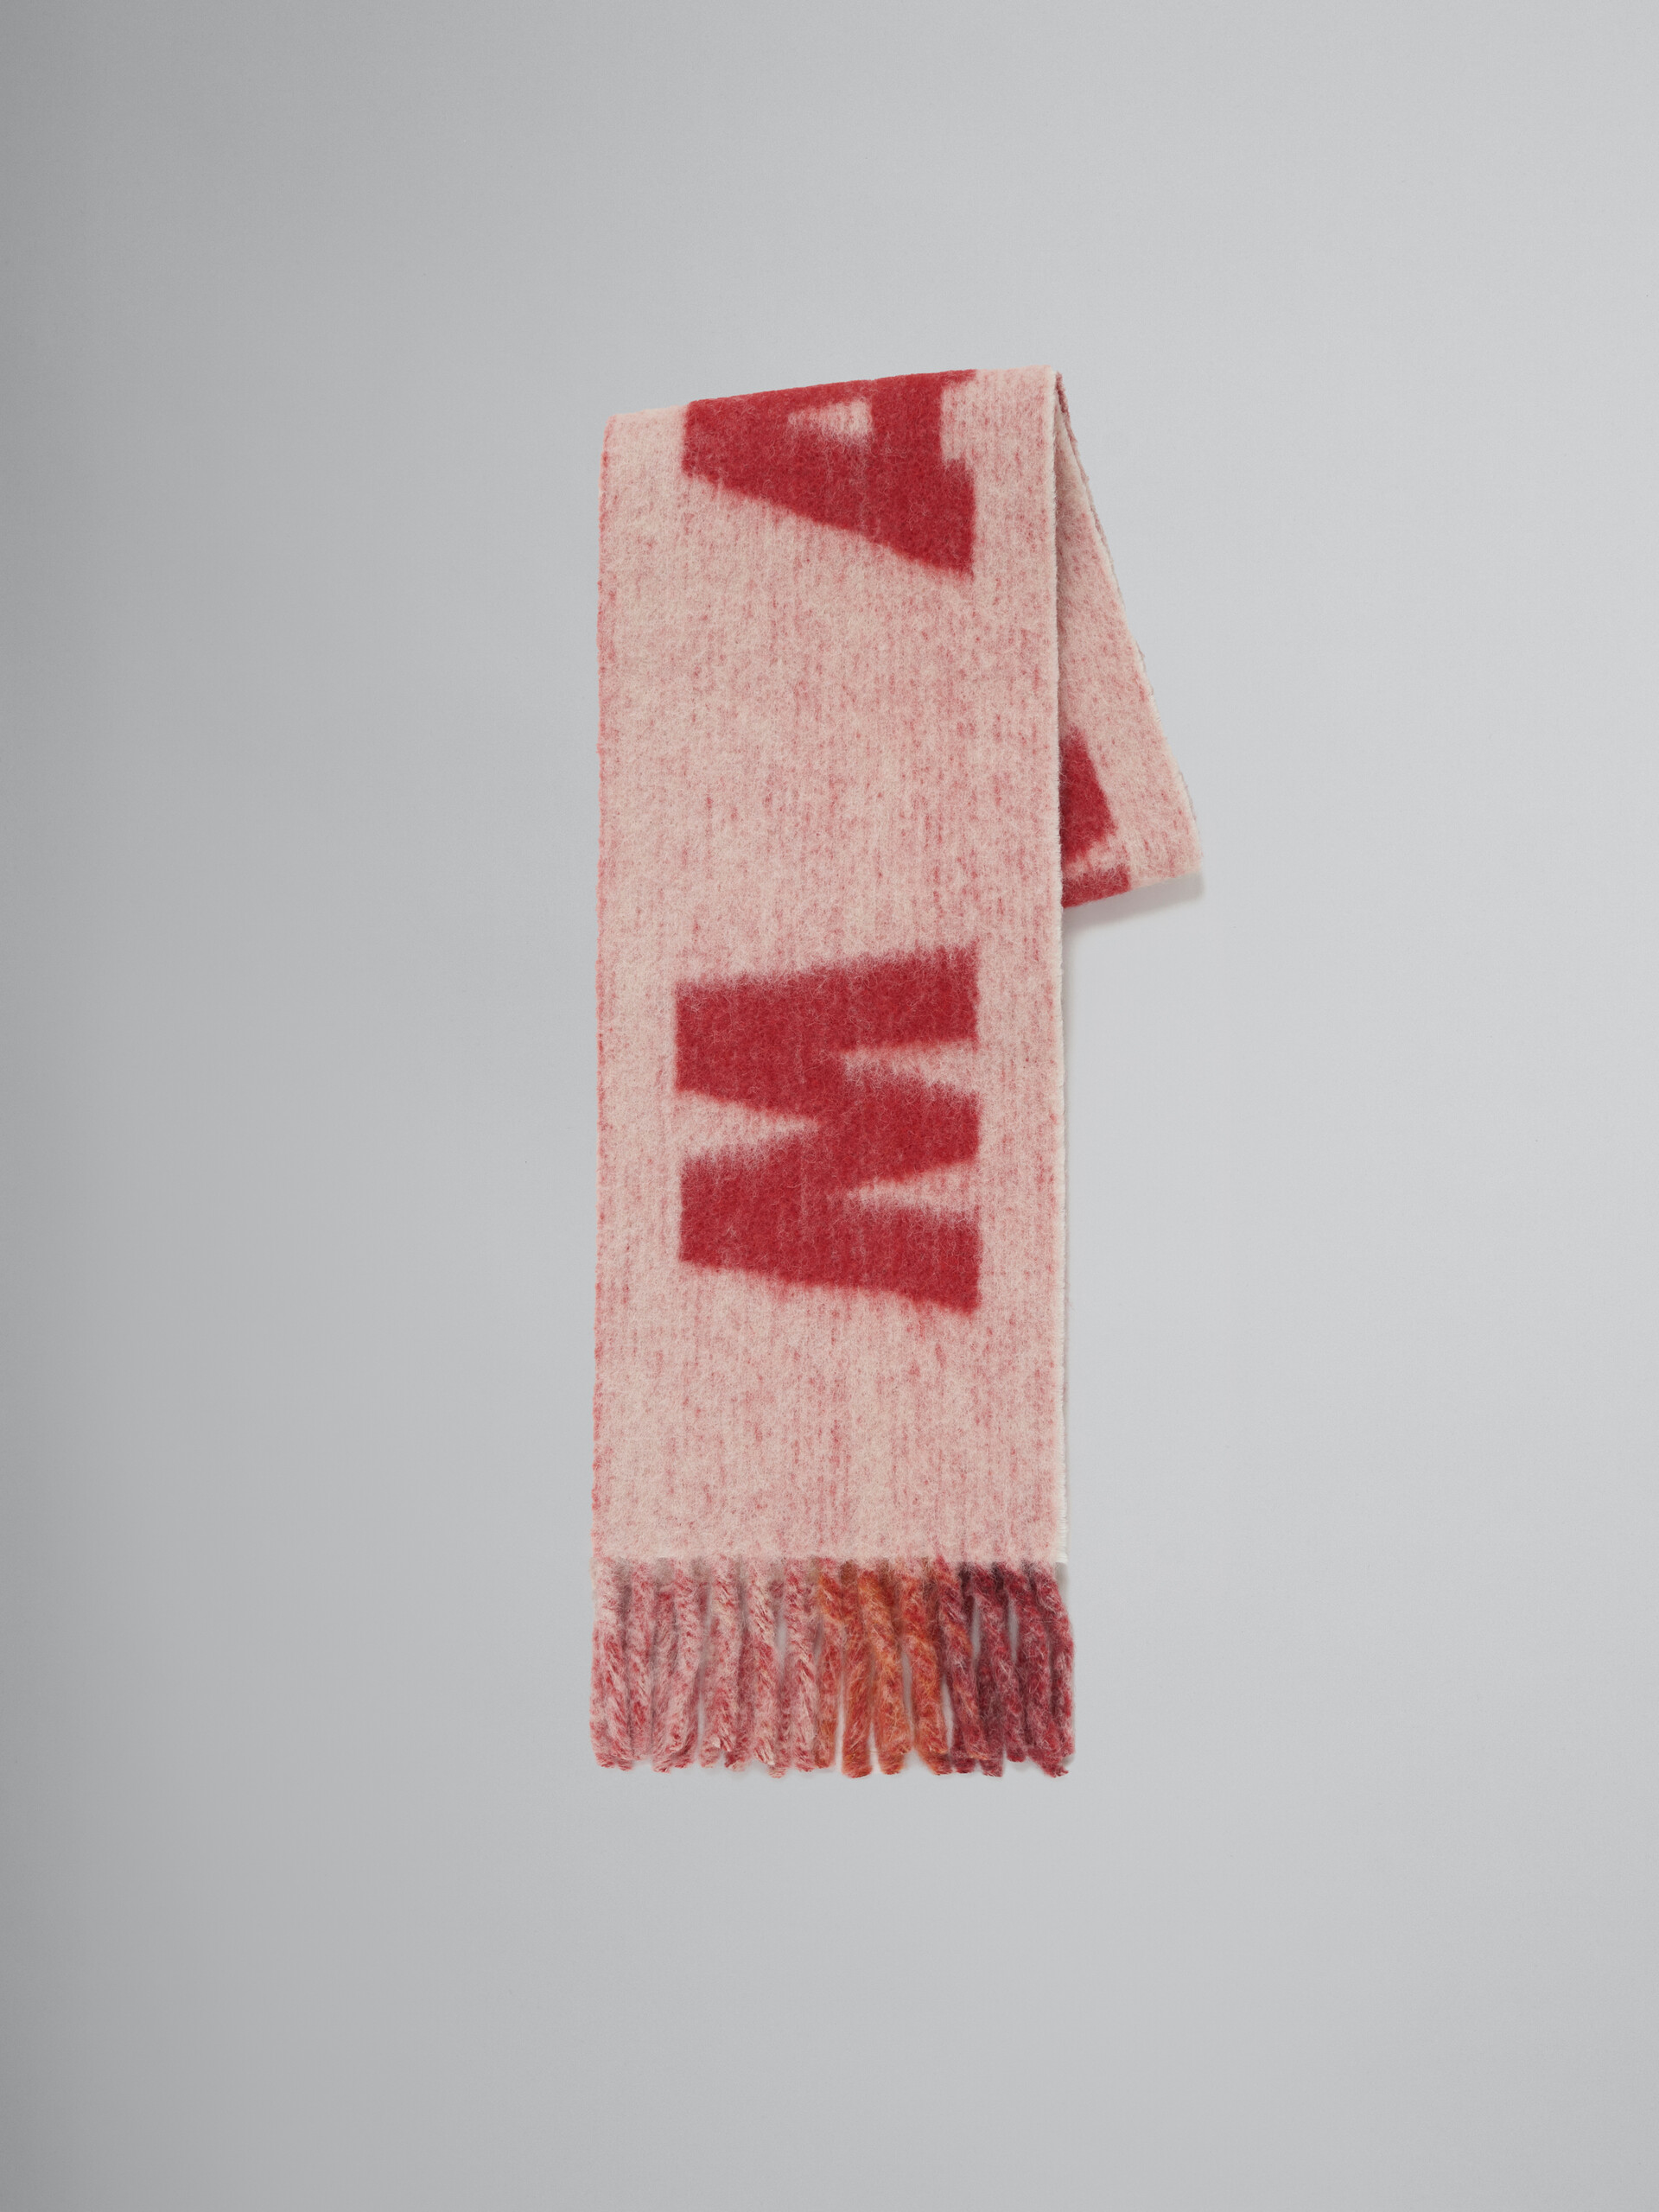 Light blue mohair and wool scarf with maxi logo - Scarves - Image 1